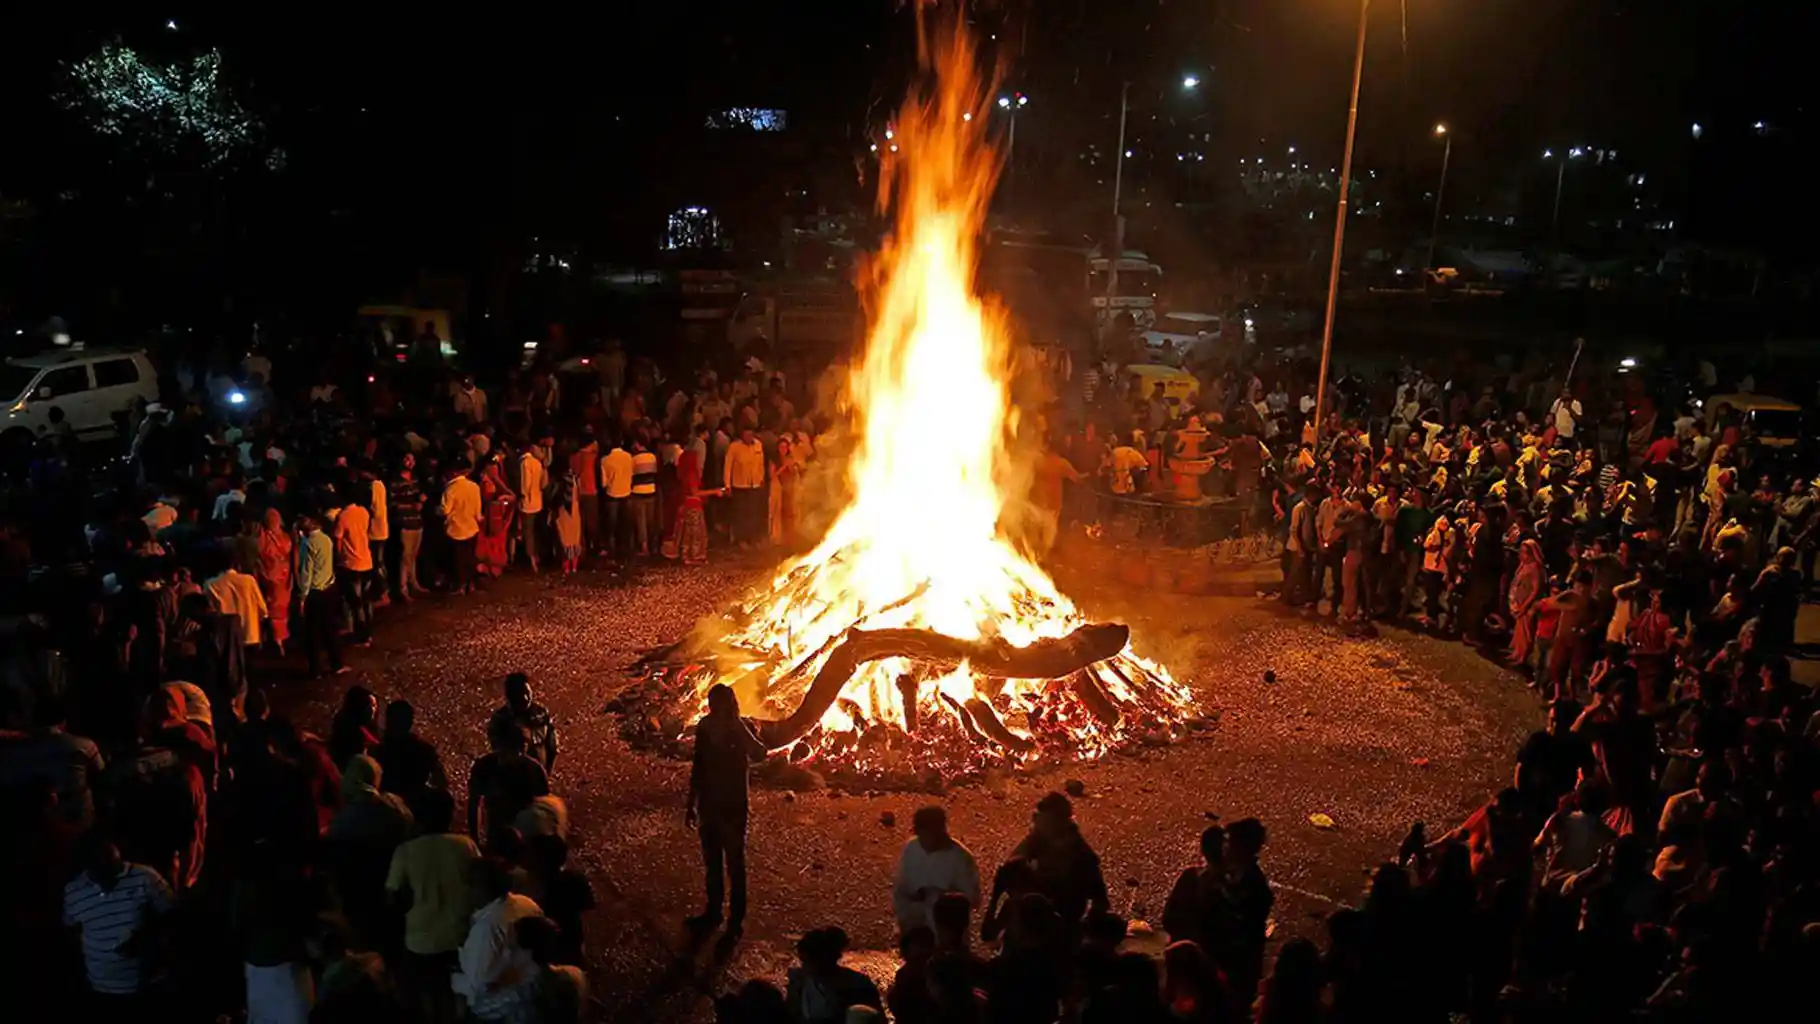 The fire pyre on the day of Holika Dahan; Image source: Dailyo